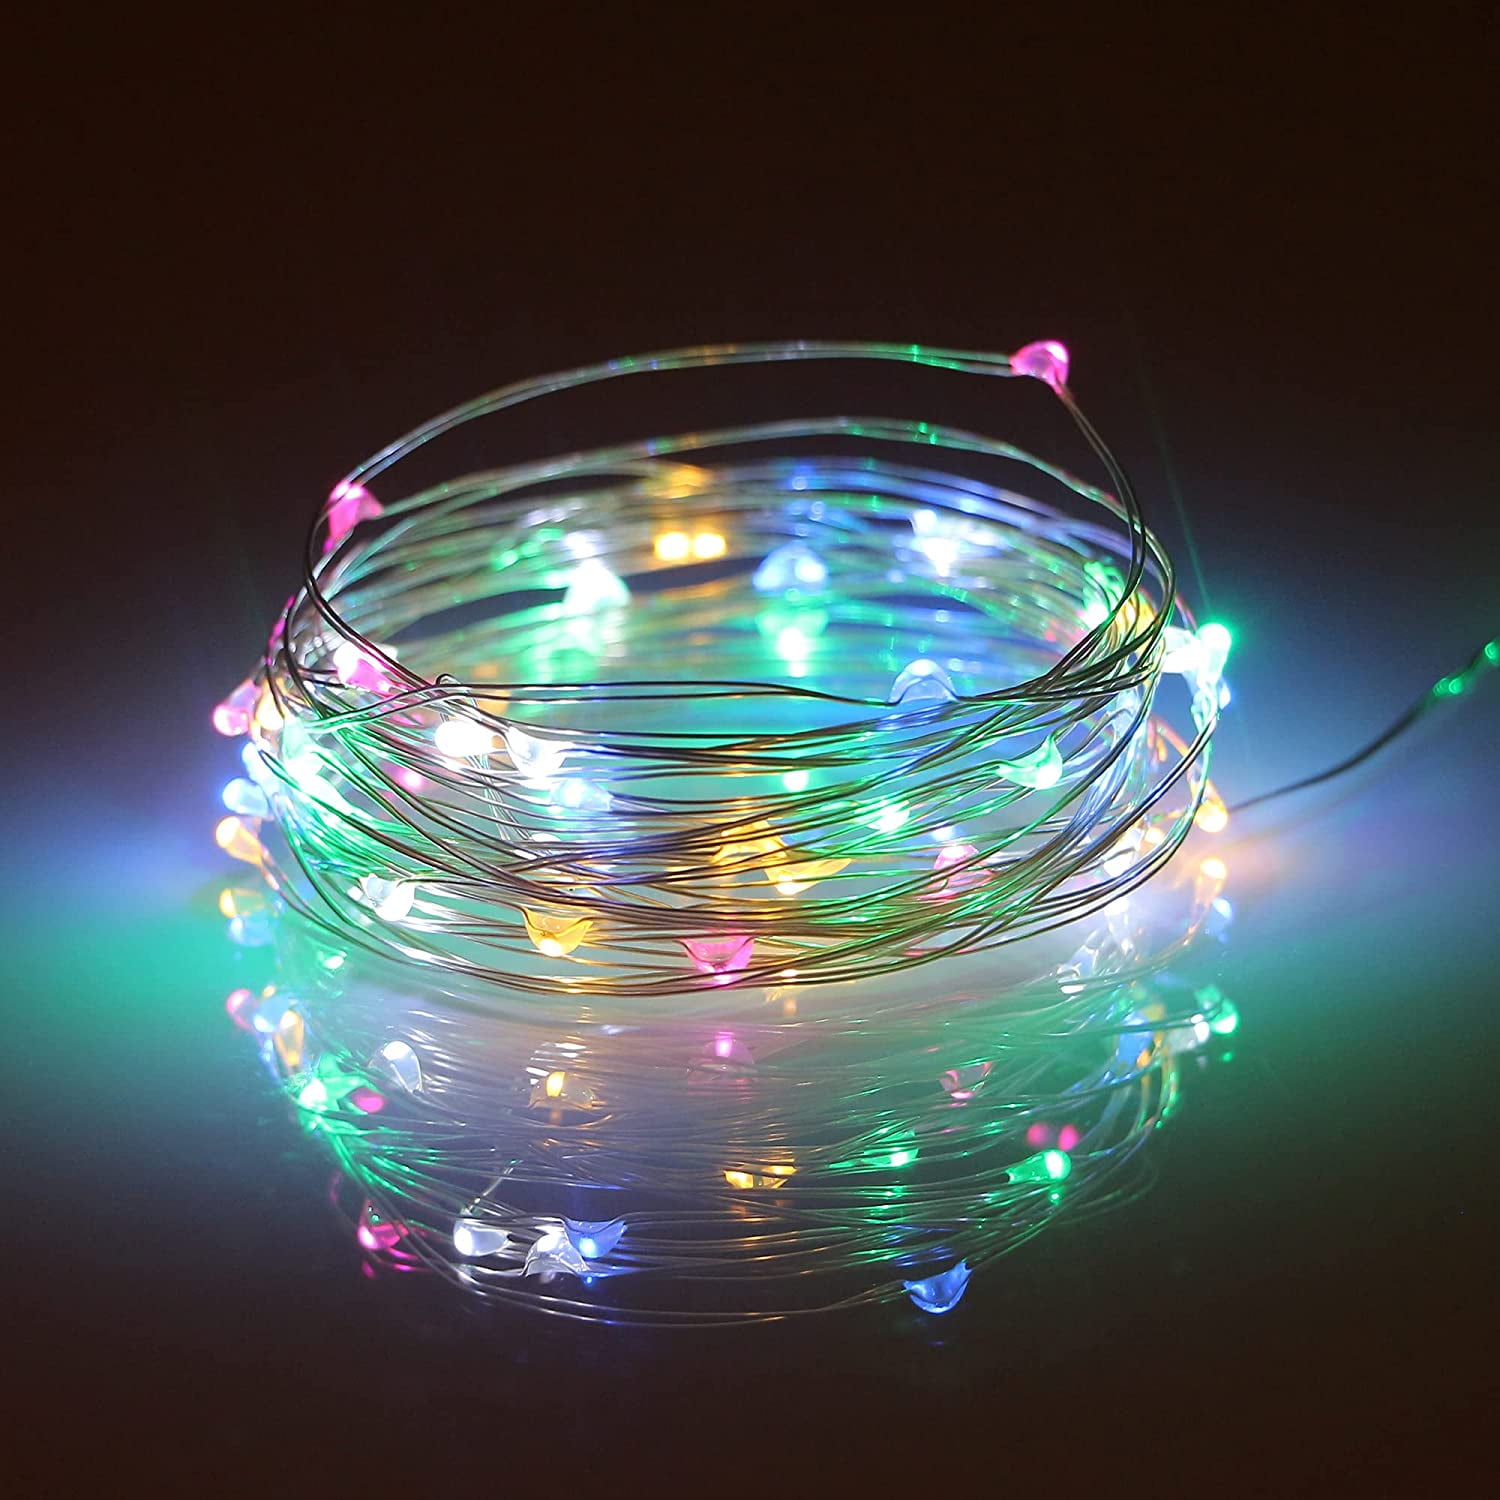 5M 50 LED Battery Twinkling Fairy String Lights Xmas Wedding Party Lamps Decor